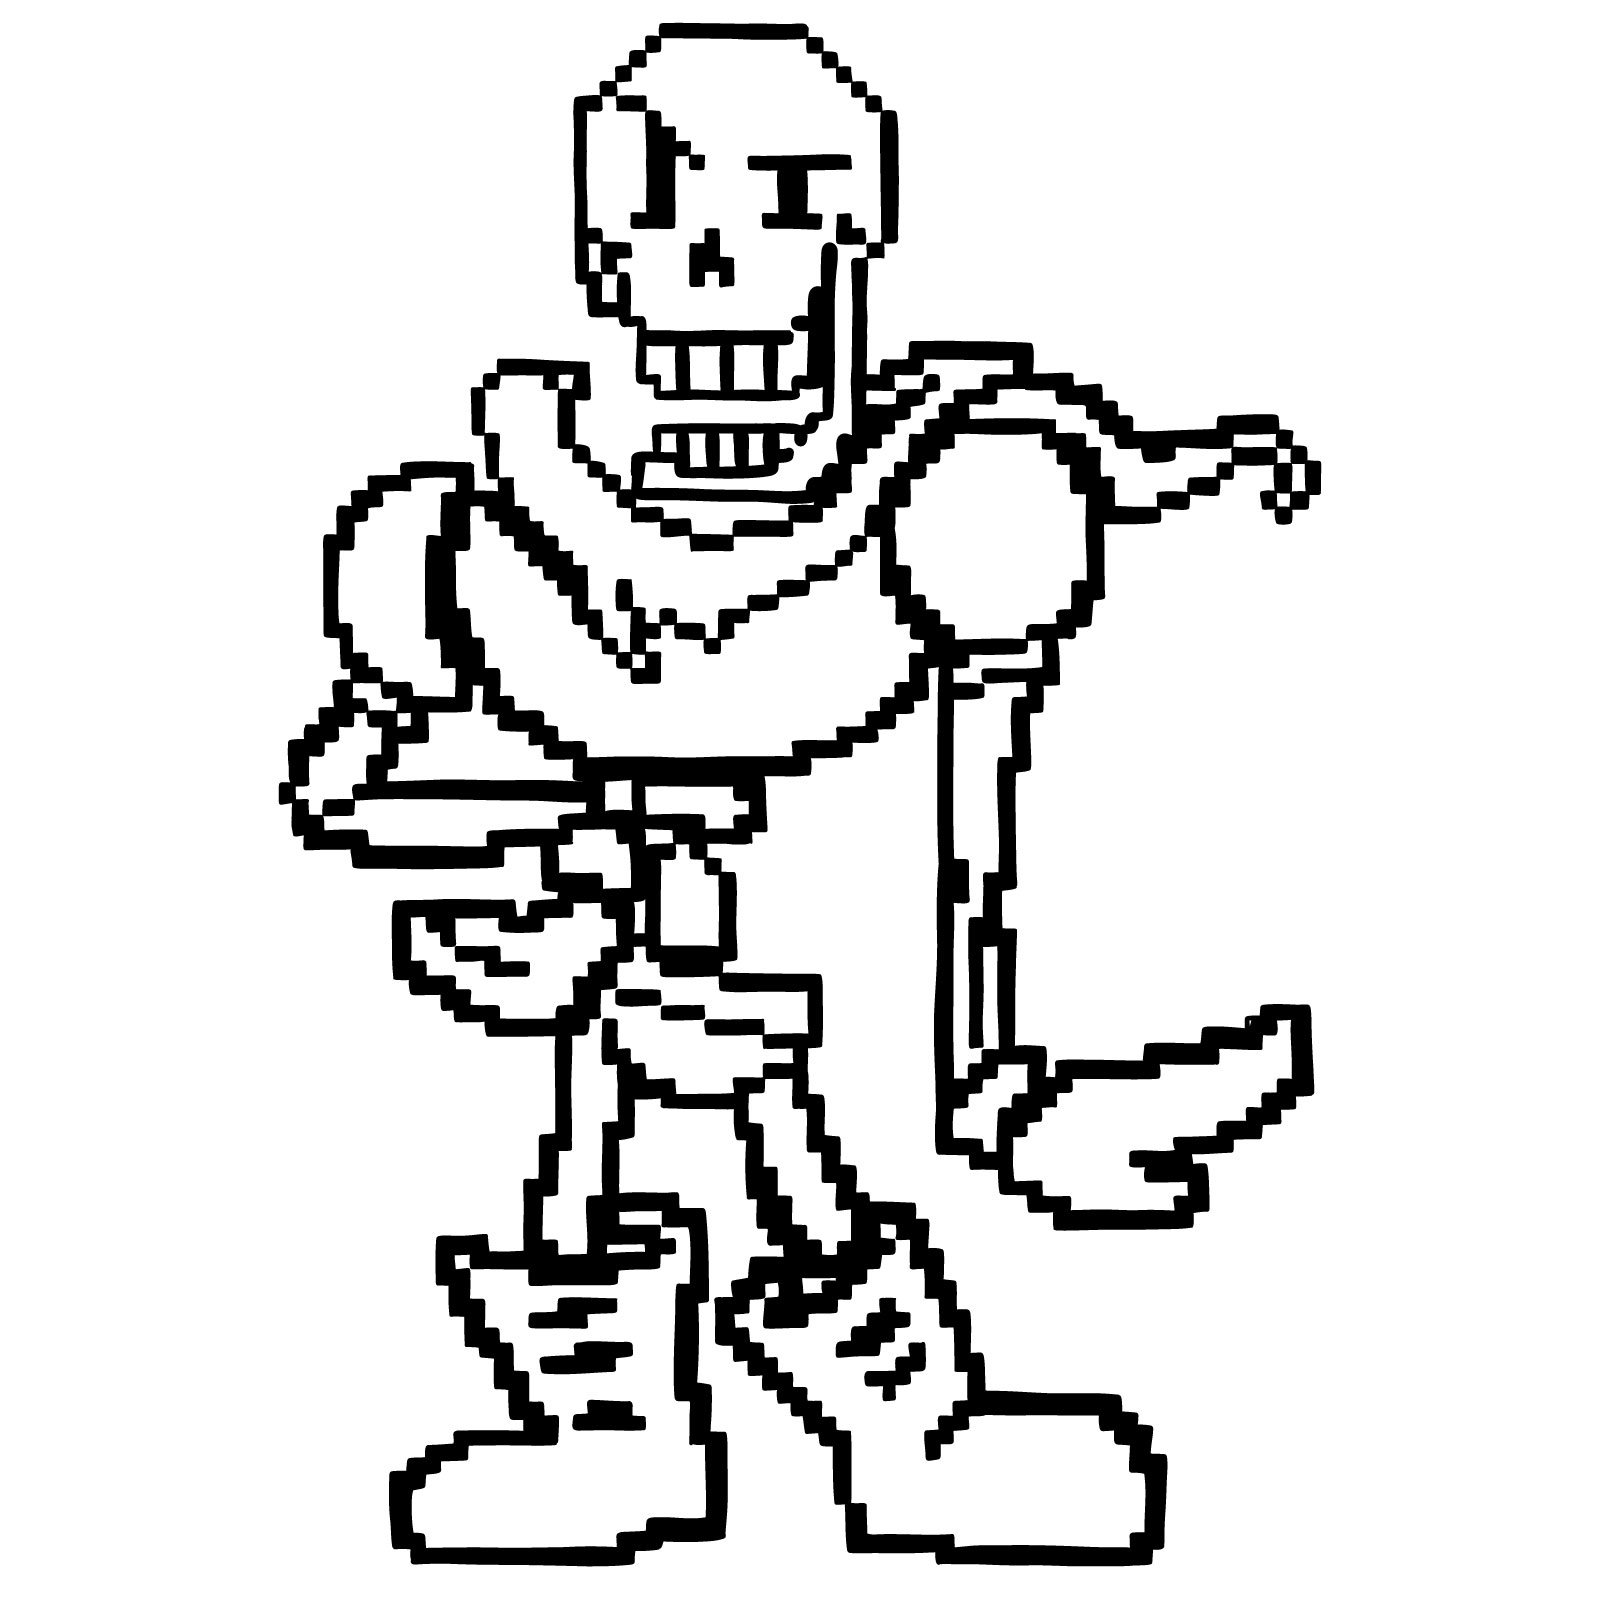 How to draw pixel Papyrus - final step